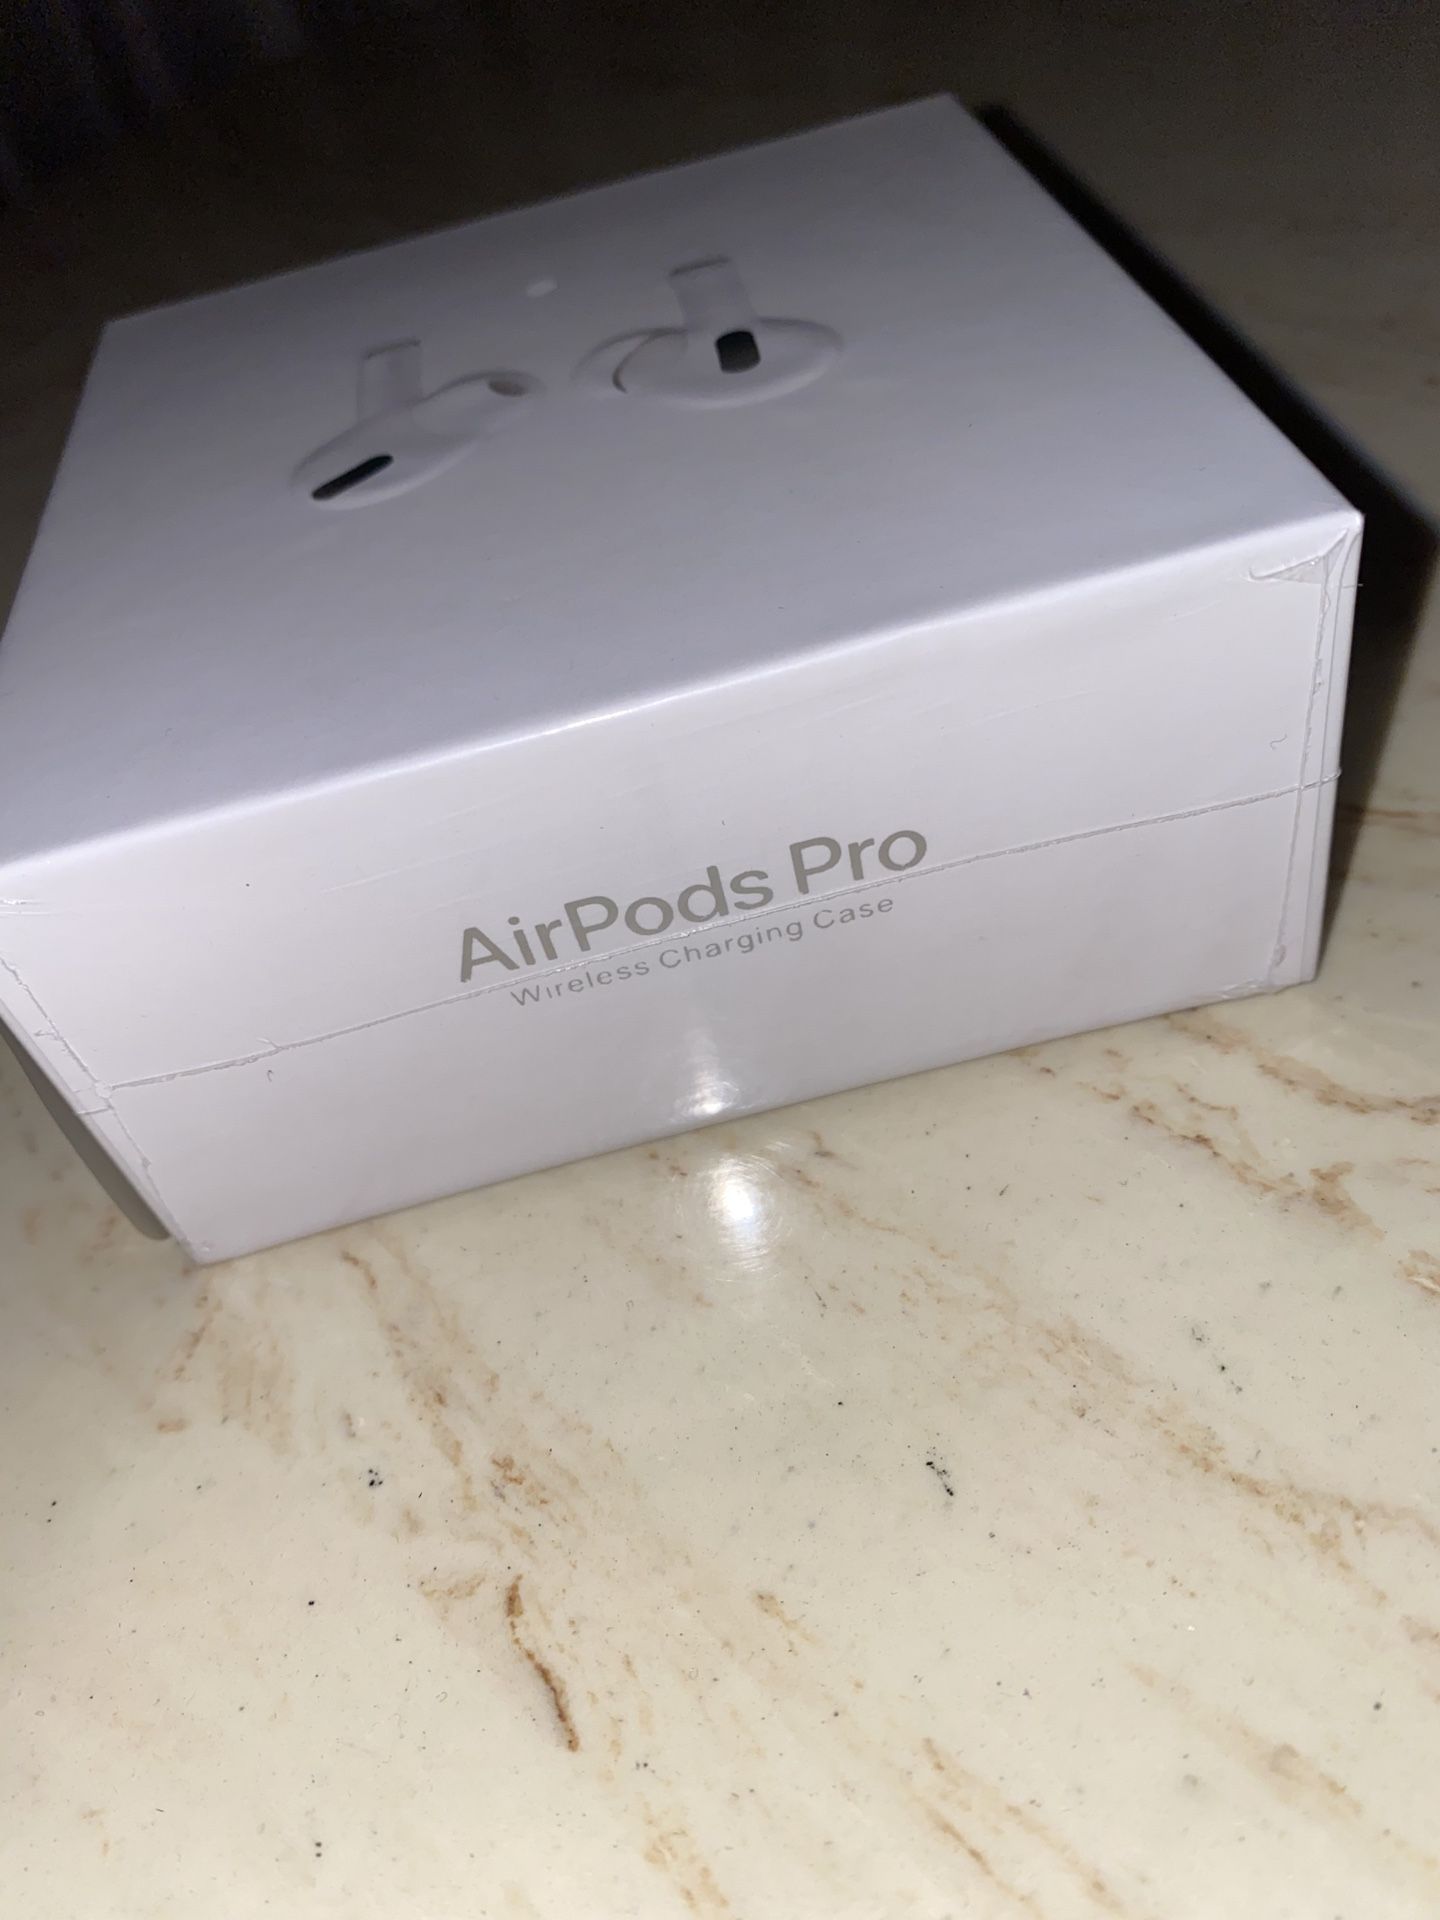 AIRPODS PRO $150 EACH BRAND NEW!!!